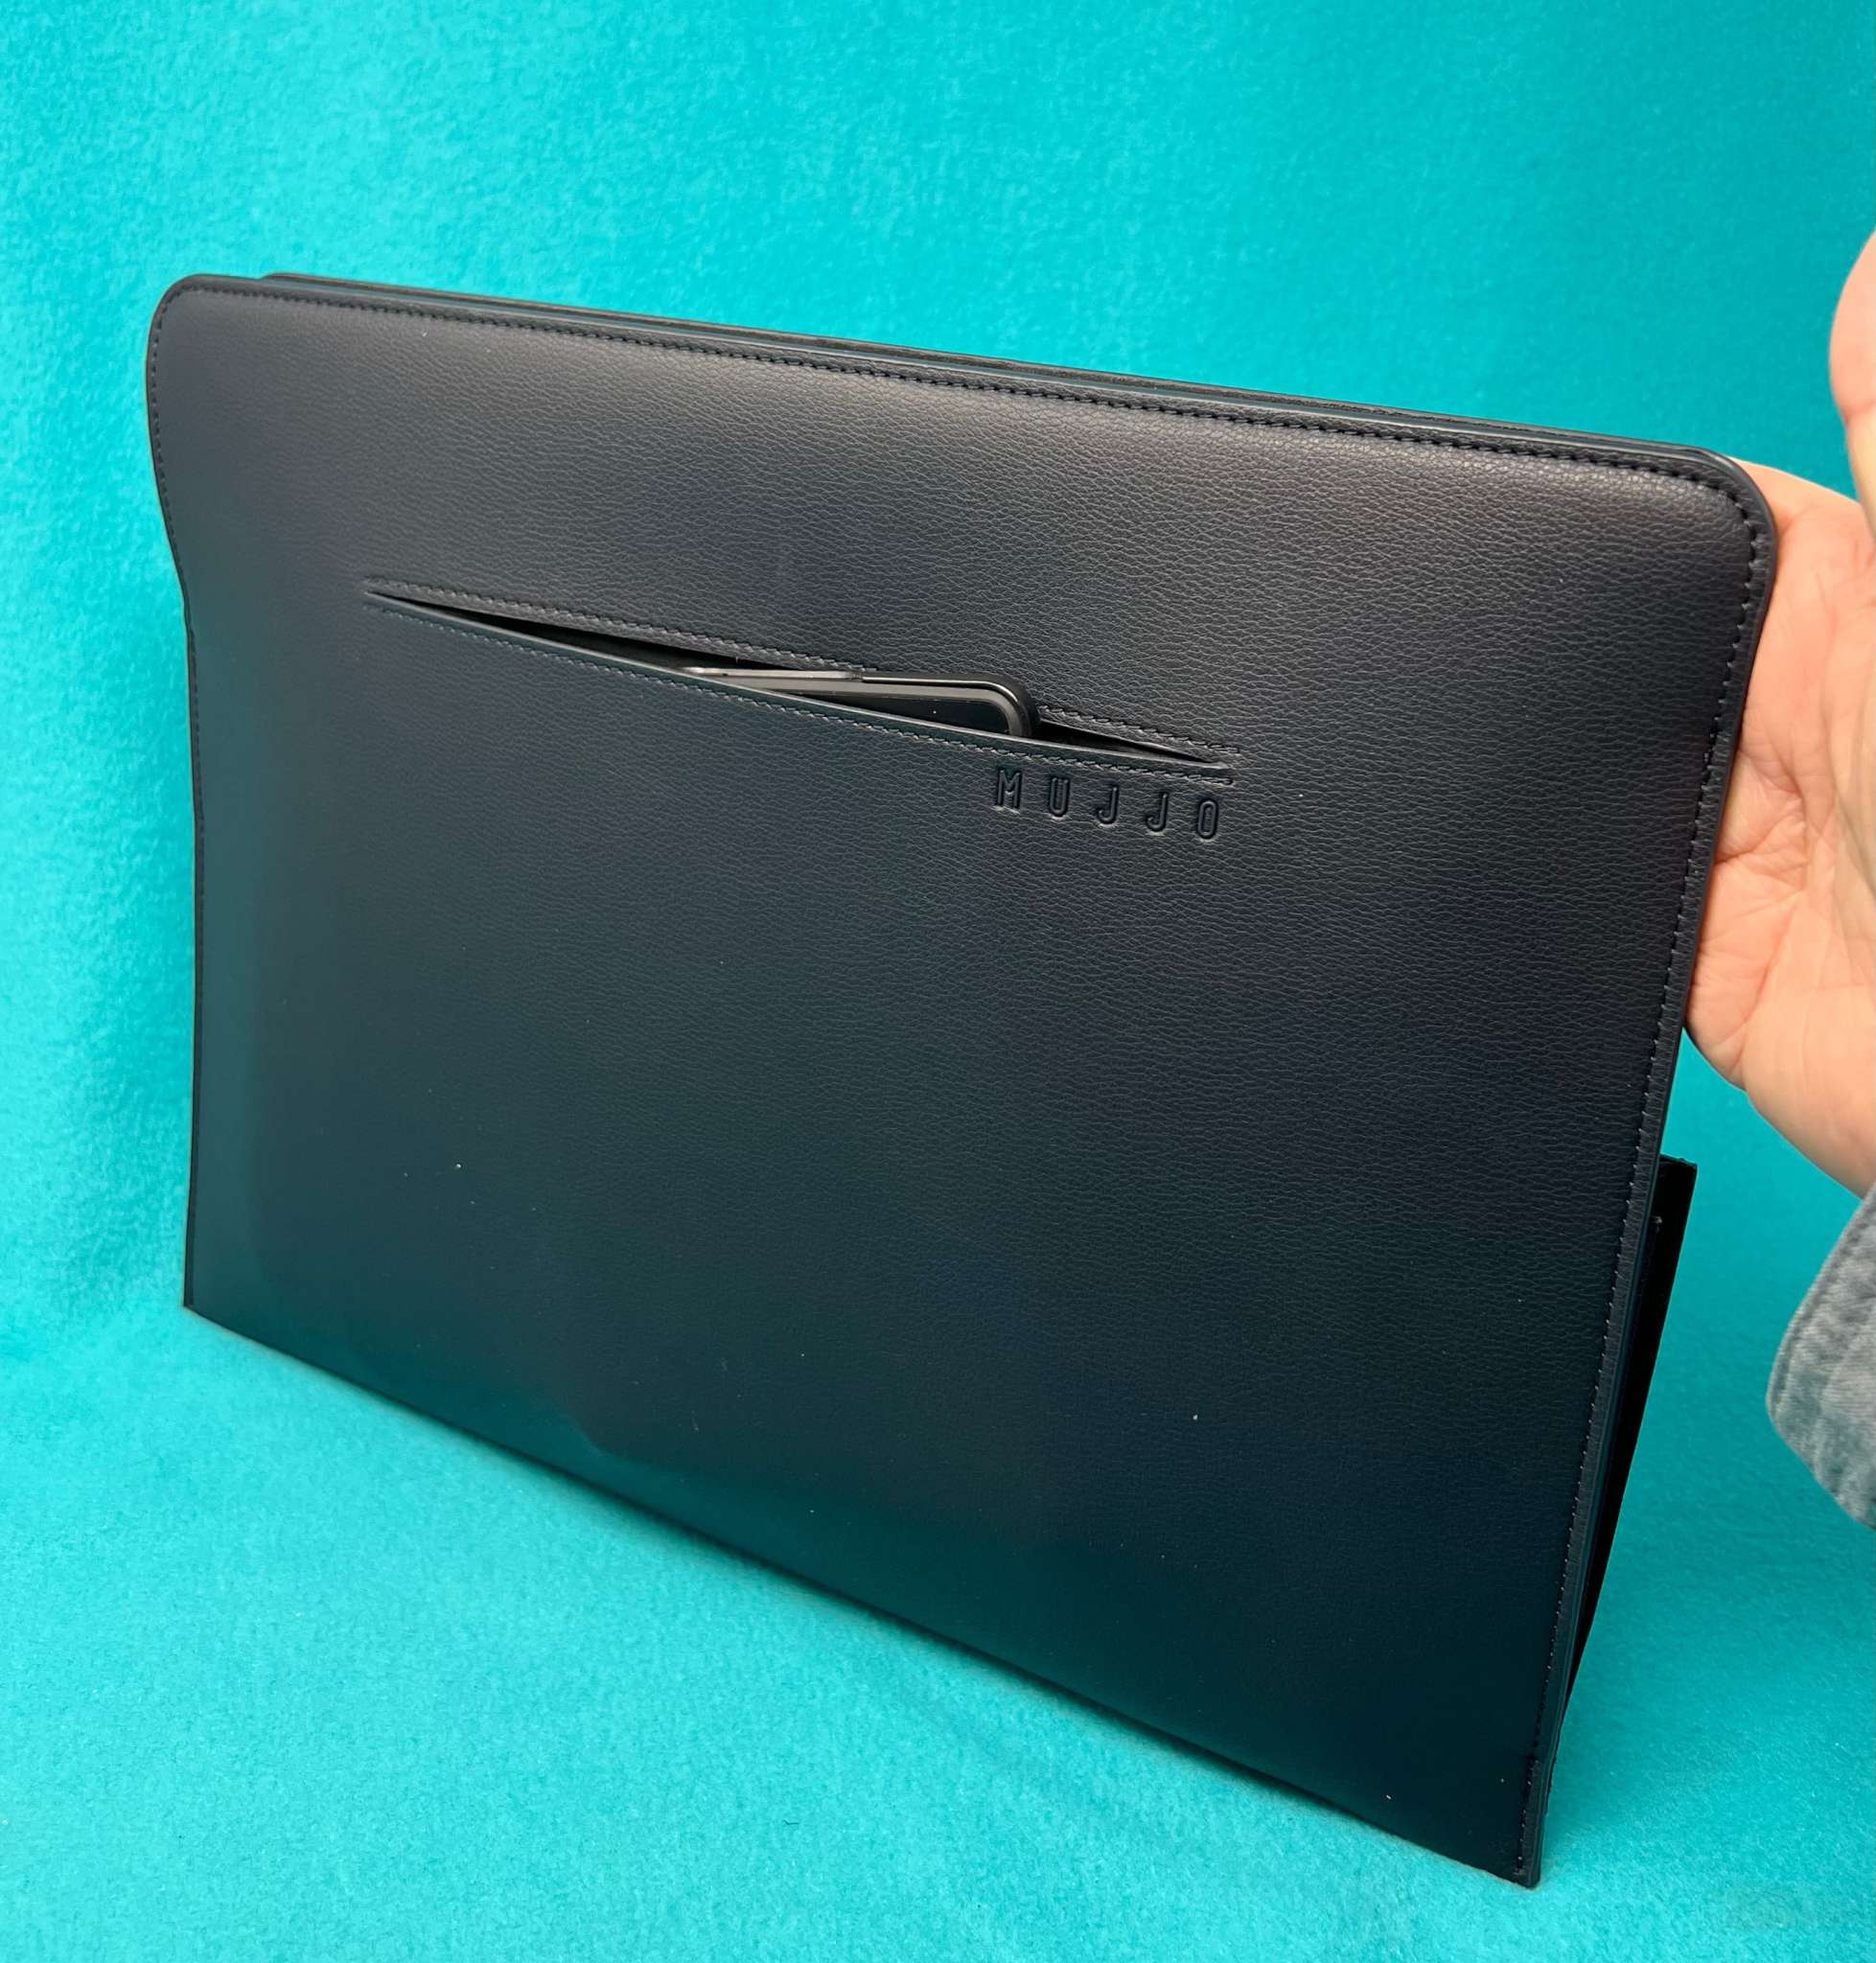 Mujjo Envoy vegan leather laptop sleeve review - holds your screens and ...